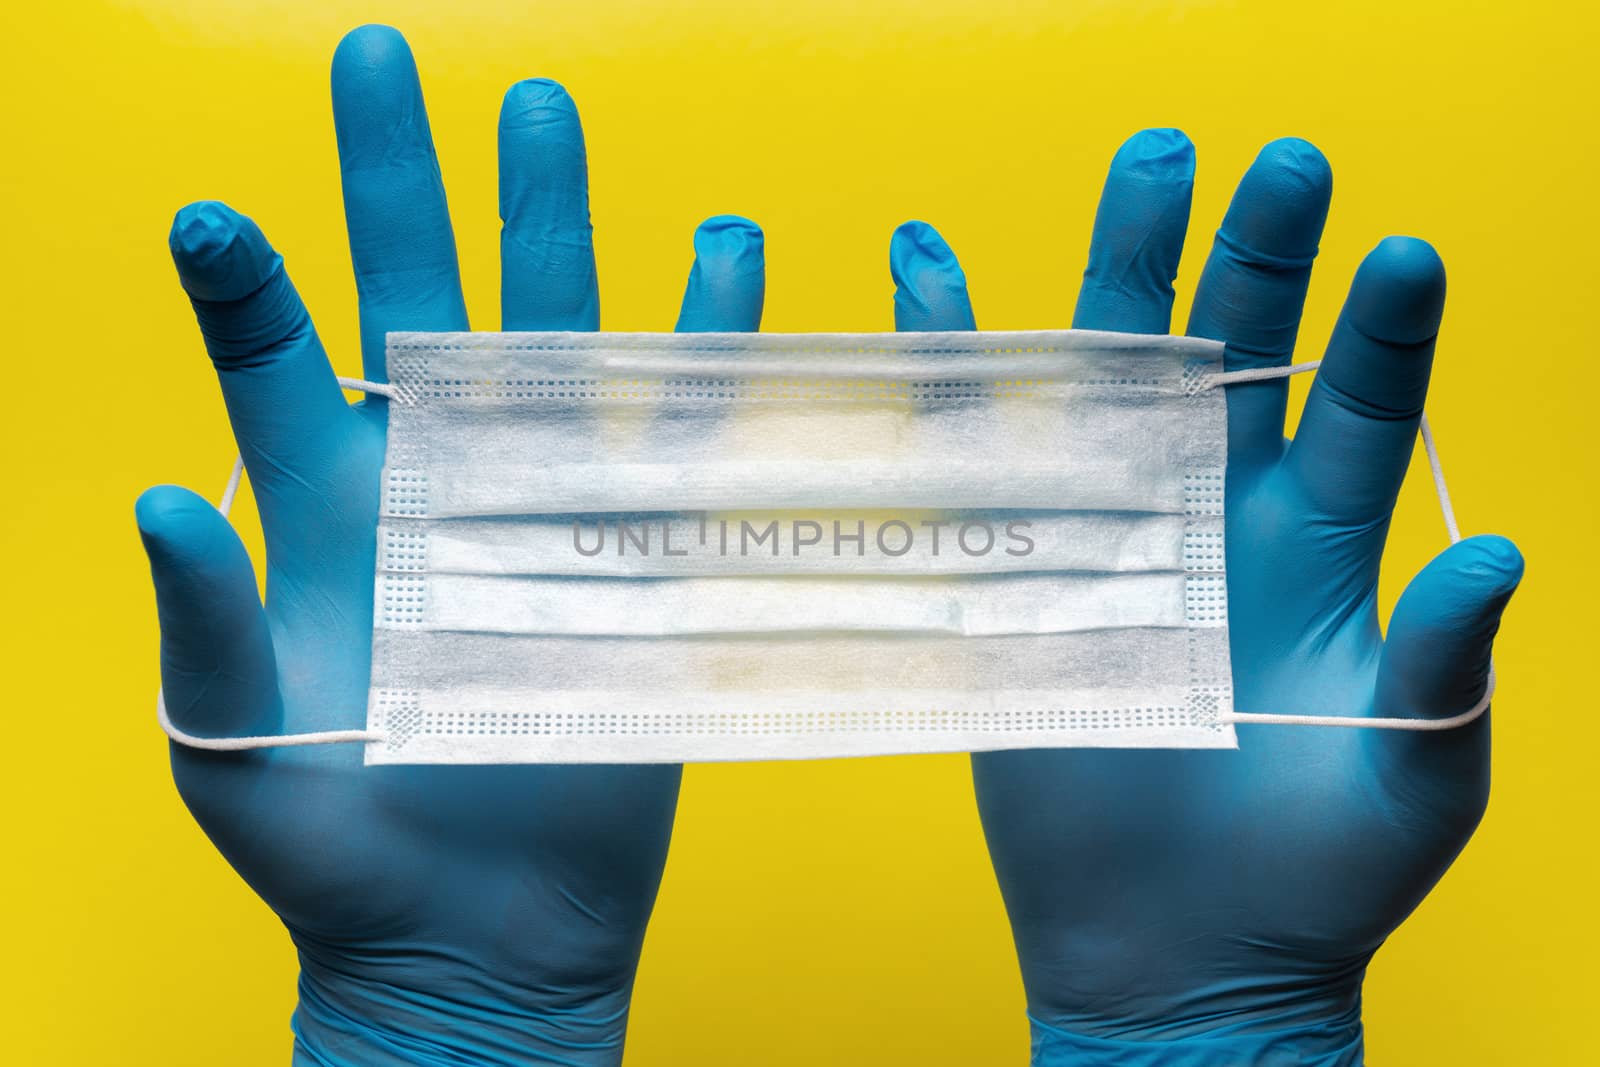 Doctor holds antivirus face mask in hands in blue medical gloves on yellow background. Pandemic insurance, airborne diseases, SARS, grippe. Medical masks for human cover nose and mouth. Concept